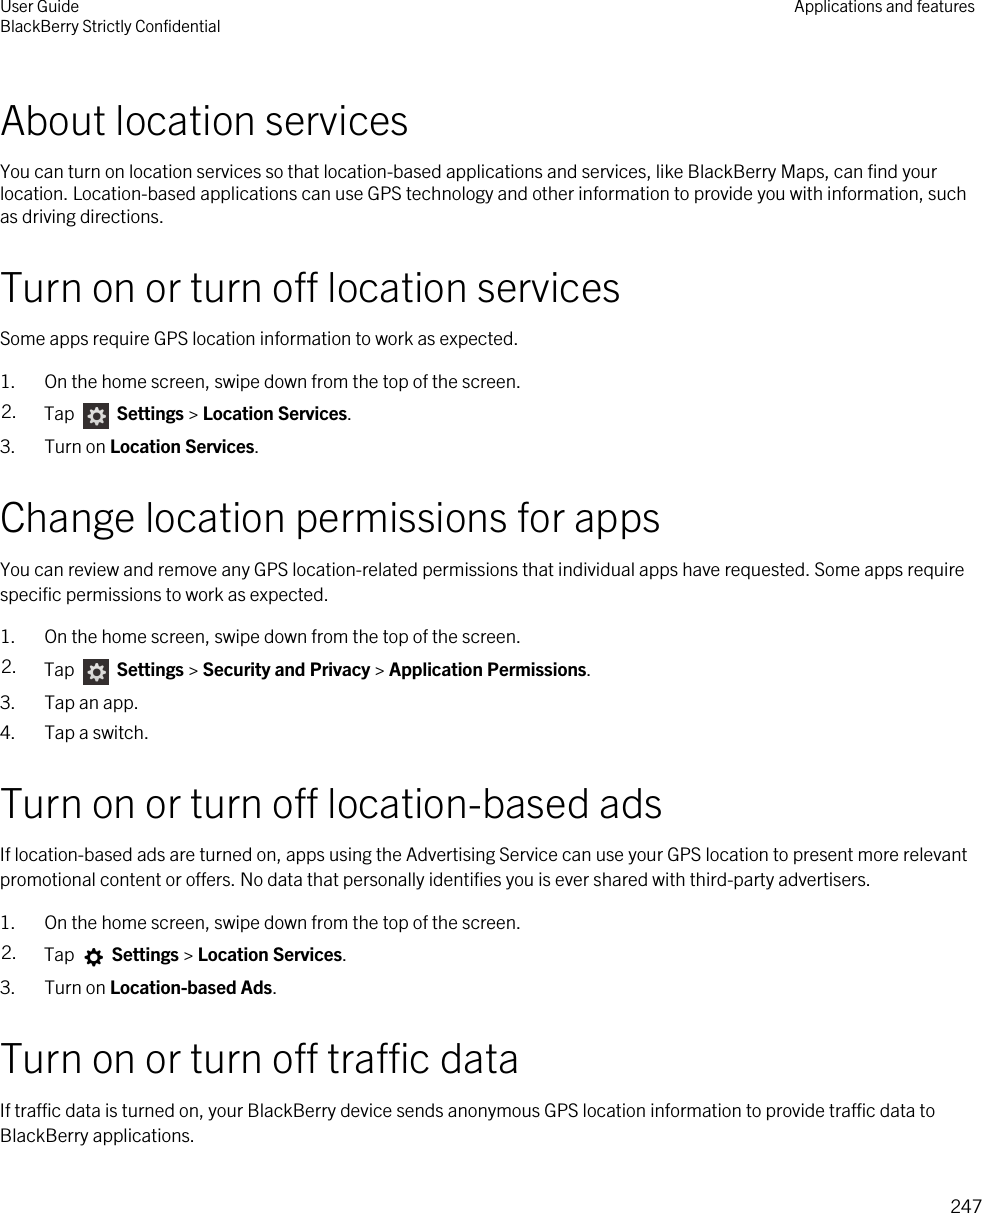 About location servicesYou can turn on location services so that location-based applications and services, like BlackBerry Maps, can find your location. Location-based applications can use GPS technology and other information to provide you with information, such as driving directions.Turn on or turn off location servicesSome apps require GPS location information to work as expected.1. On the home screen, swipe down from the top of the screen.2. Tap   Settings &gt; Location Services.3. Turn on Location Services.Change location permissions for appsYou can review and remove any GPS location-related permissions that individual apps have requested. Some apps require specific permissions to work as expected.1. On the home screen, swipe down from the top of the screen.2. Tap   Settings &gt; Security and Privacy &gt; Application Permissions.3. Tap an app.4. Tap a switch.Turn on or turn off location-based adsIf location-based ads are turned on, apps using the Advertising Service can use your GPS location to present more relevant promotional content or offers. No data that personally identifies you is ever shared with third-party advertisers.1. On the home screen, swipe down from the top of the screen.2. Tap   Settings &gt; Location Services.3. Turn on Location-based Ads.Turn on or turn off traffic dataIf traffic data is turned on, your BlackBerry device sends anonymous GPS location information to provide traffic data to BlackBerry applications.User GuideBlackBerry Strictly Confidential Applications and features247